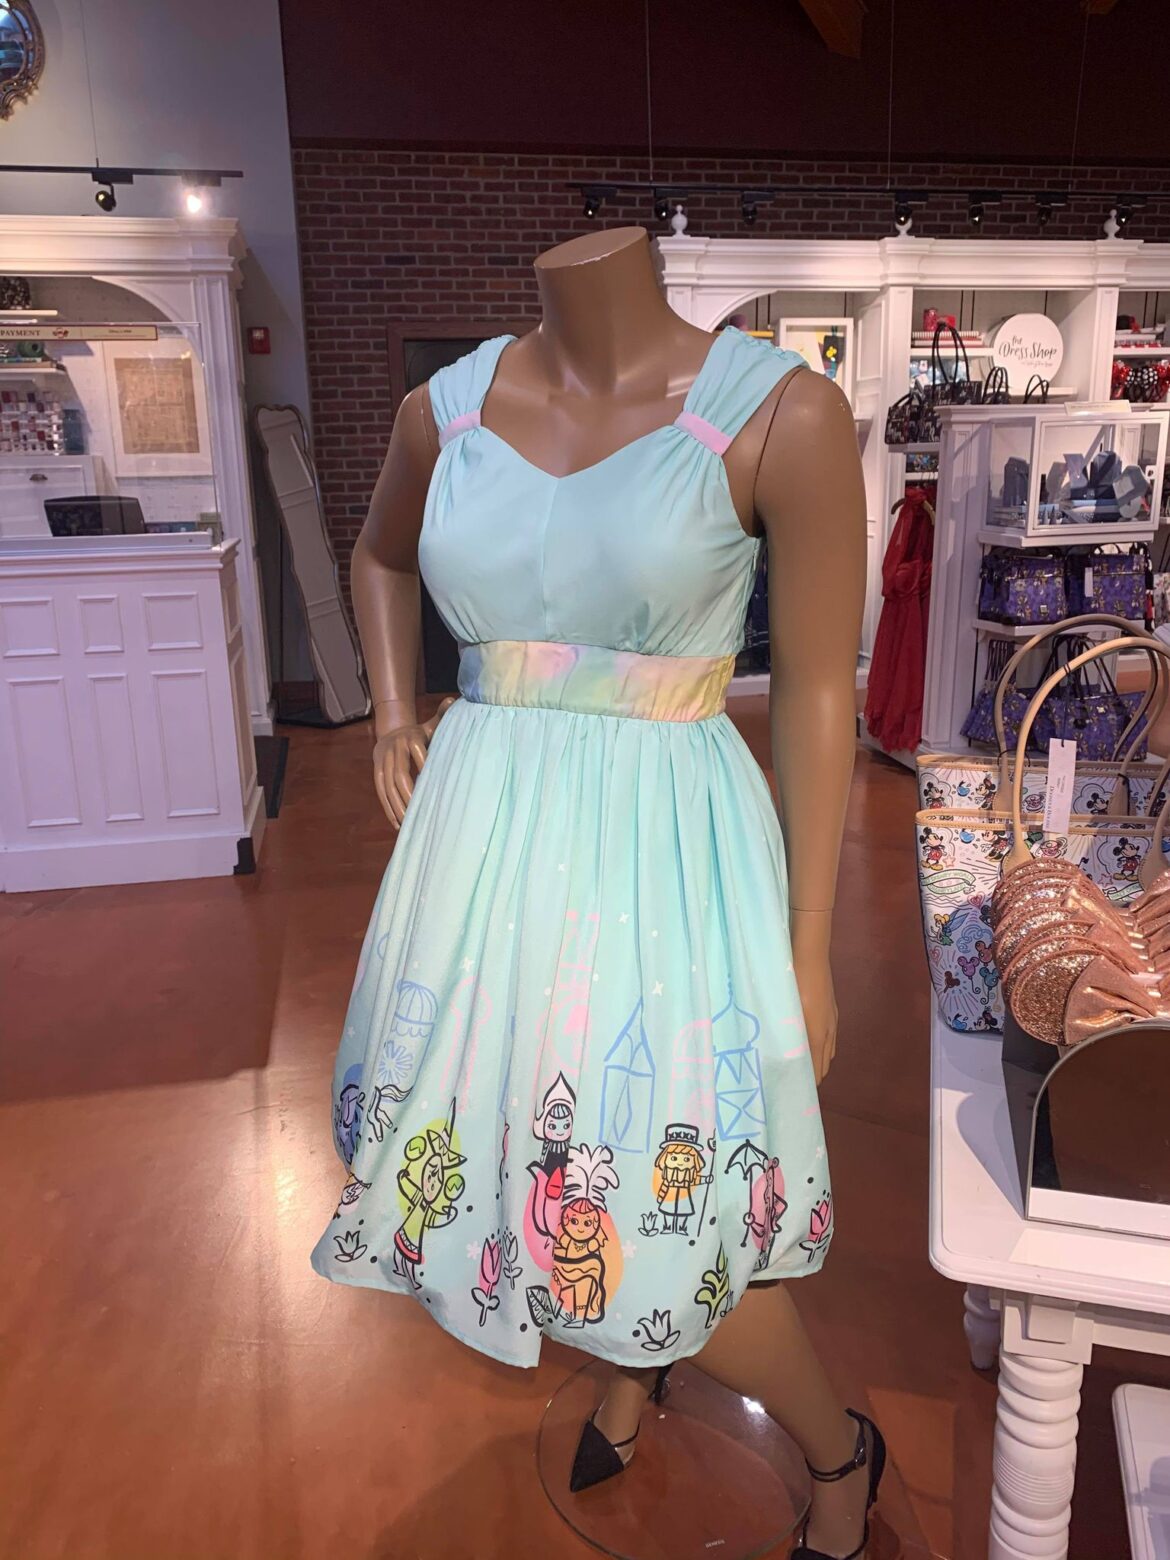 New it’s a small world Dress Now At The Disney Parks